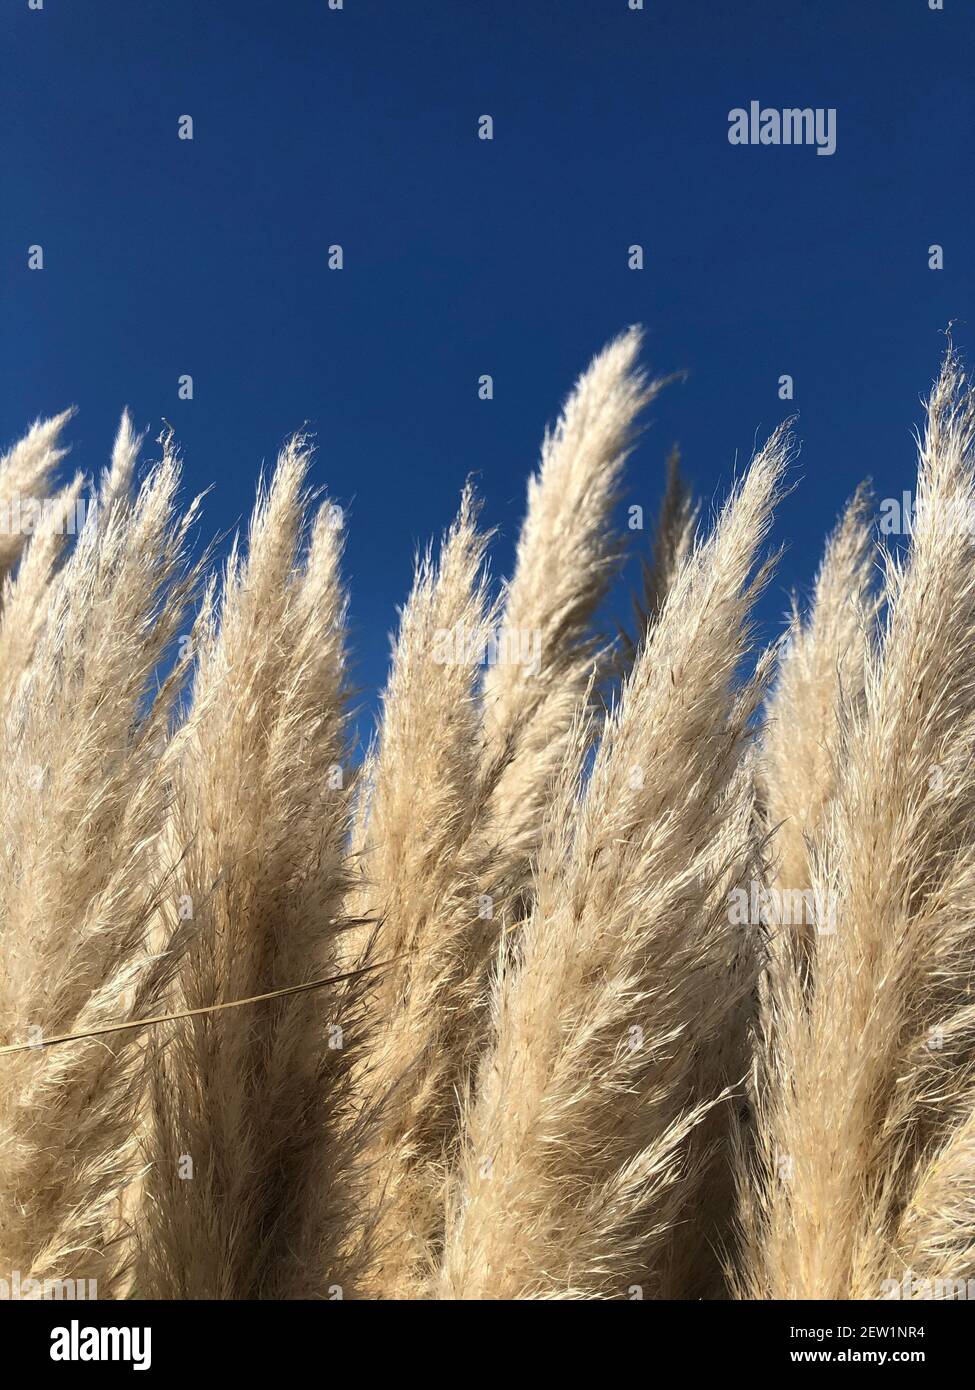 A close up of the delicate flowers and stalks of a Pampas grass plant under a blue sky with copy space Stock Photo